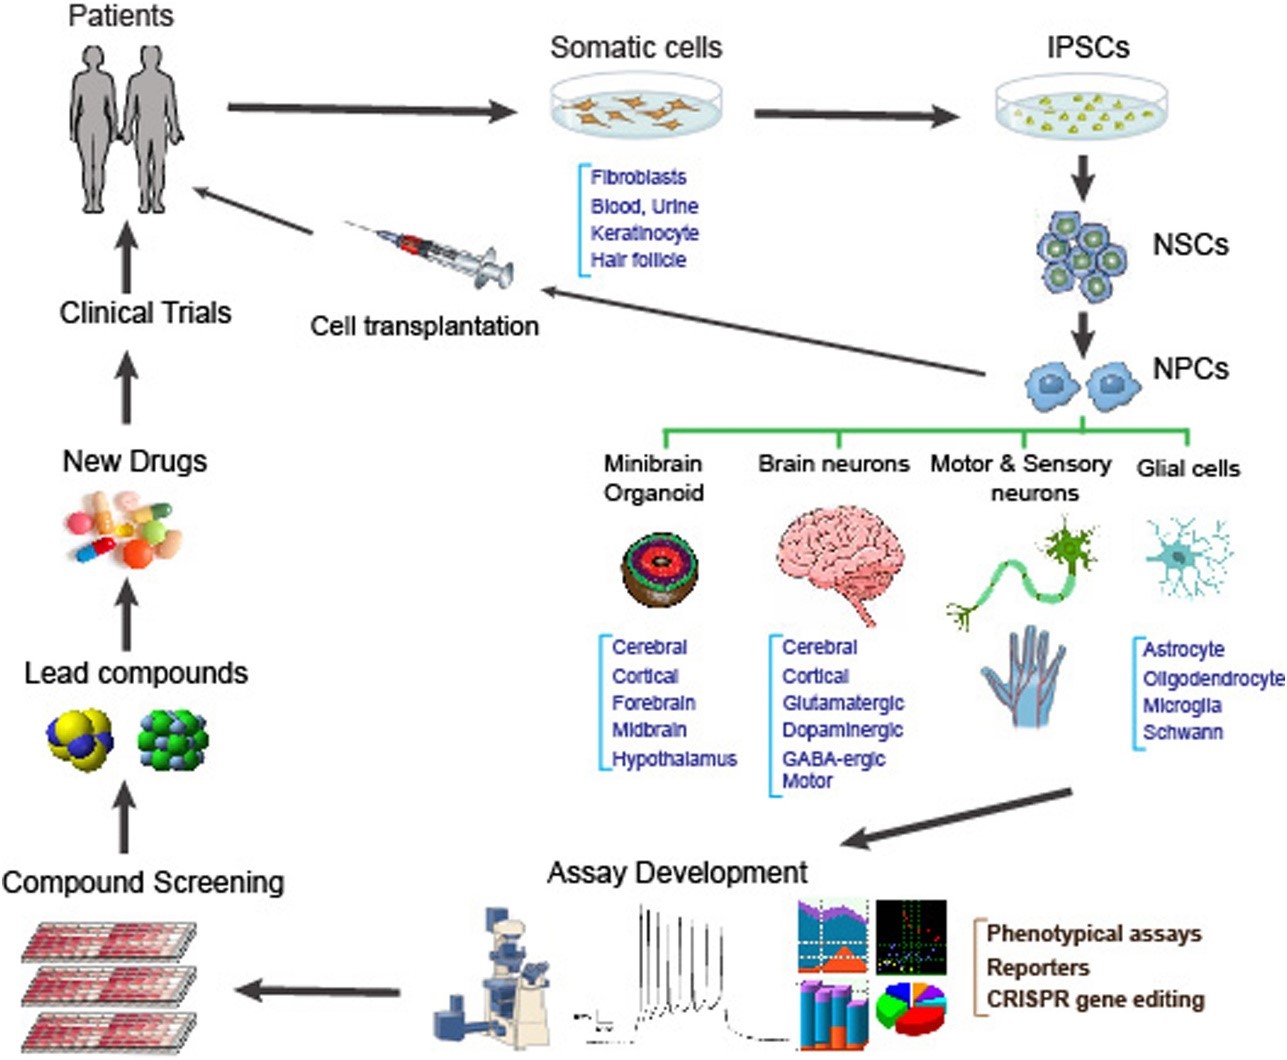 Applications of iPSCs in drug discovery and development.